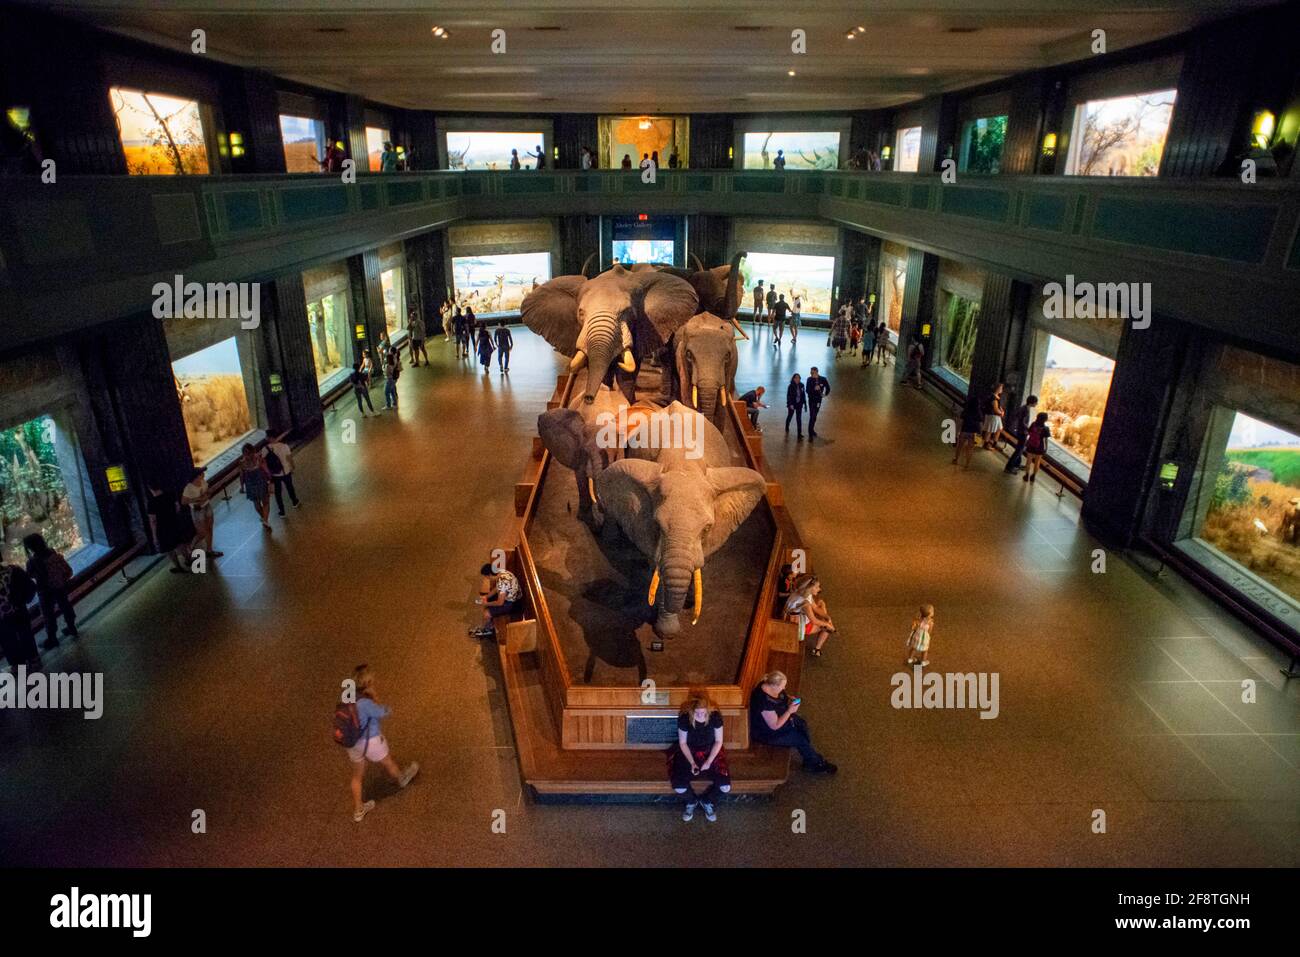 Dioramas and displays at Akeley Hall of African Mammals in the American Museum of Natural History located in New York City. Stock Photo